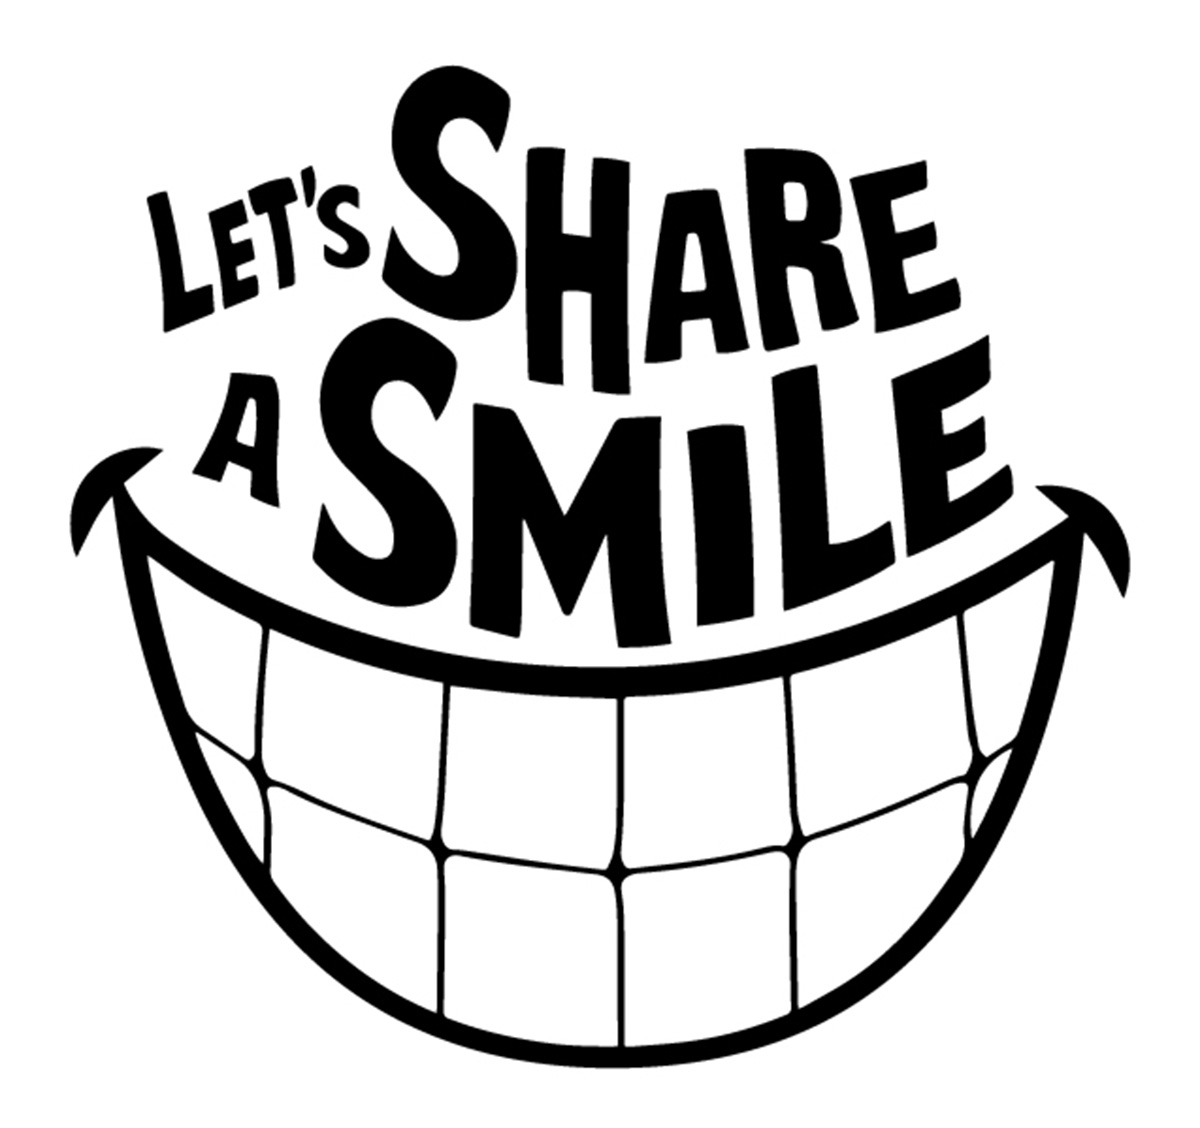 Let's Share a Smile